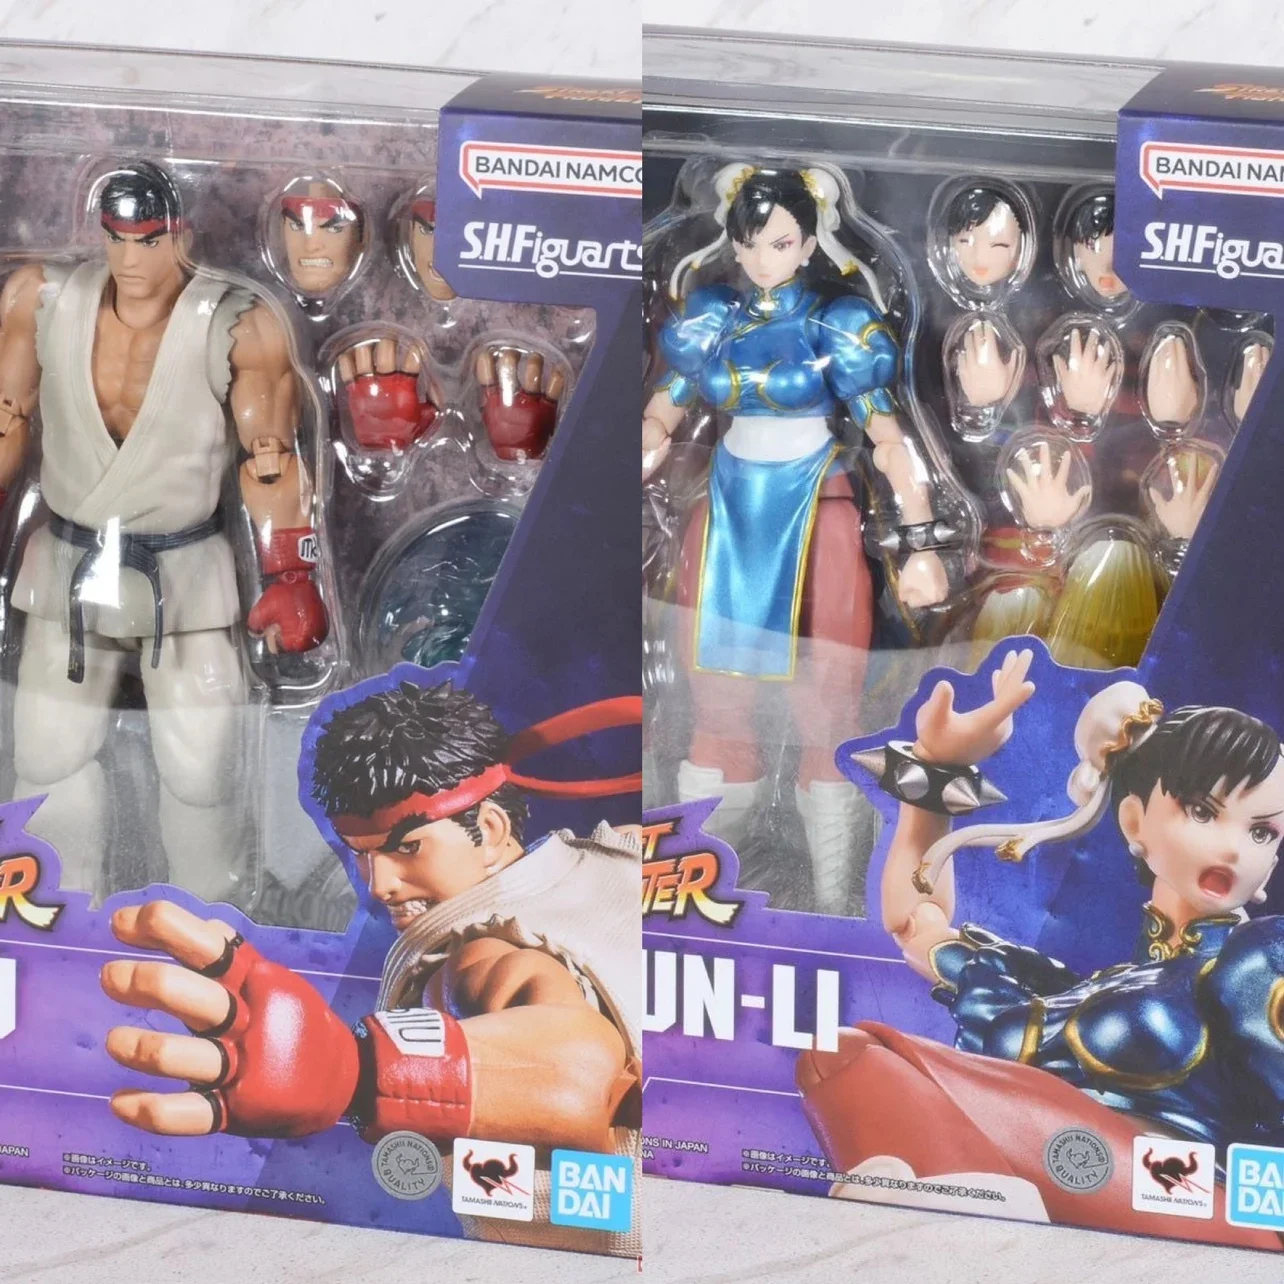 

Original Bandai Anime Character Shf Street Fighter 6 Ryu-Chun Li - Ourfit 2 Game Action Figures Model Desktop Collection Gift